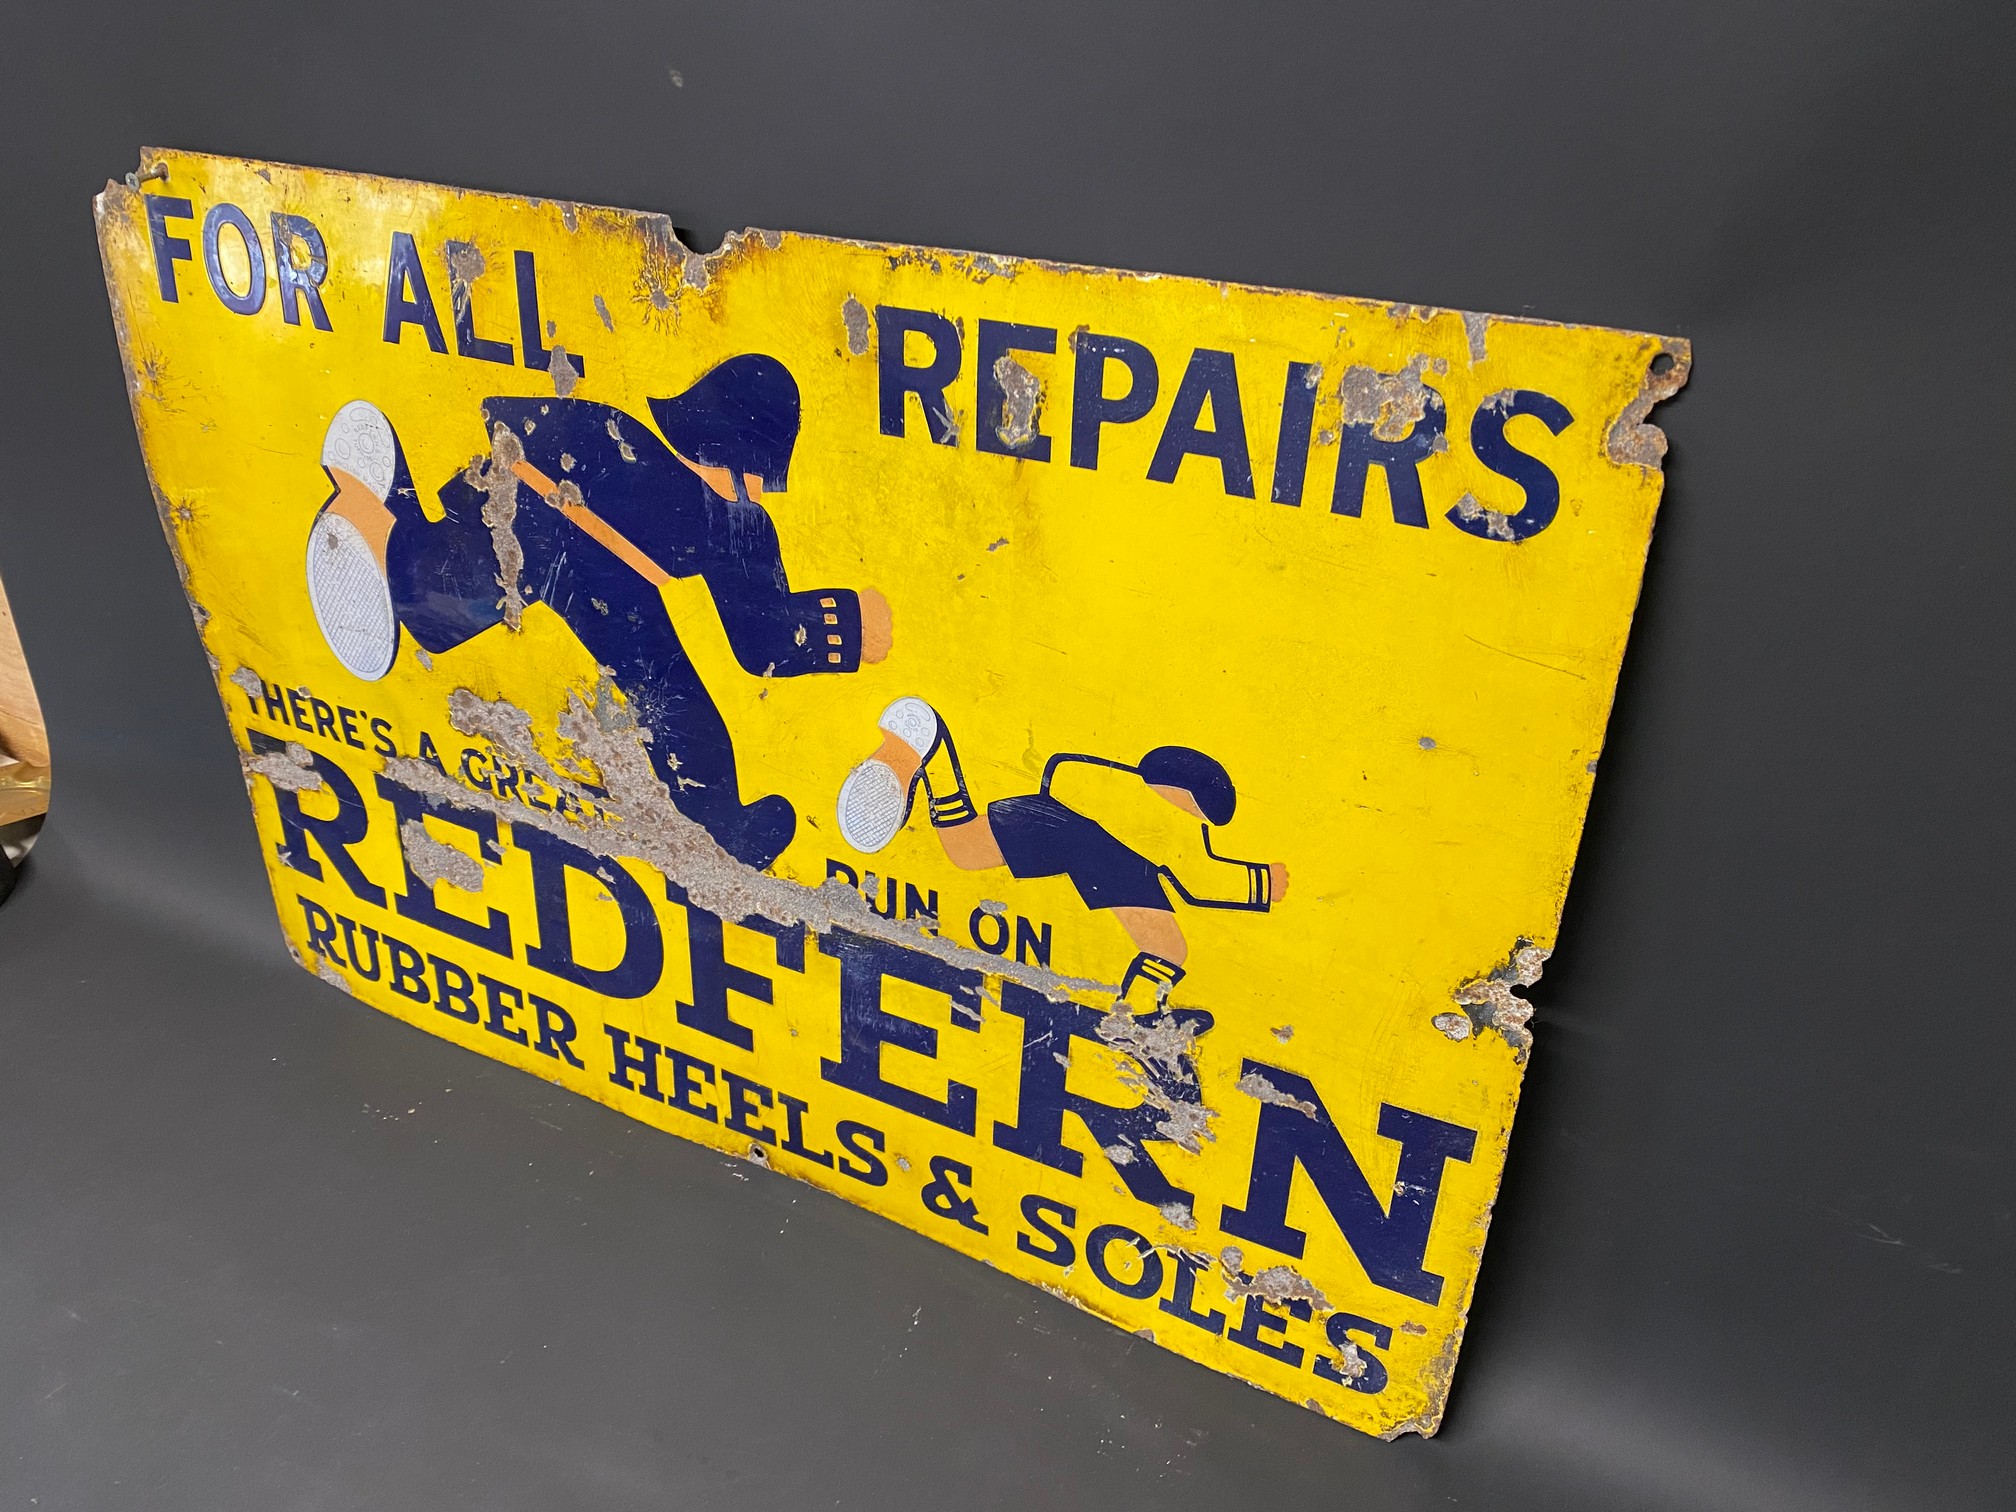 A Redfern Rubber Heels and Soles pictorial enamel sign, 30 x 20". - Image 2 of 3